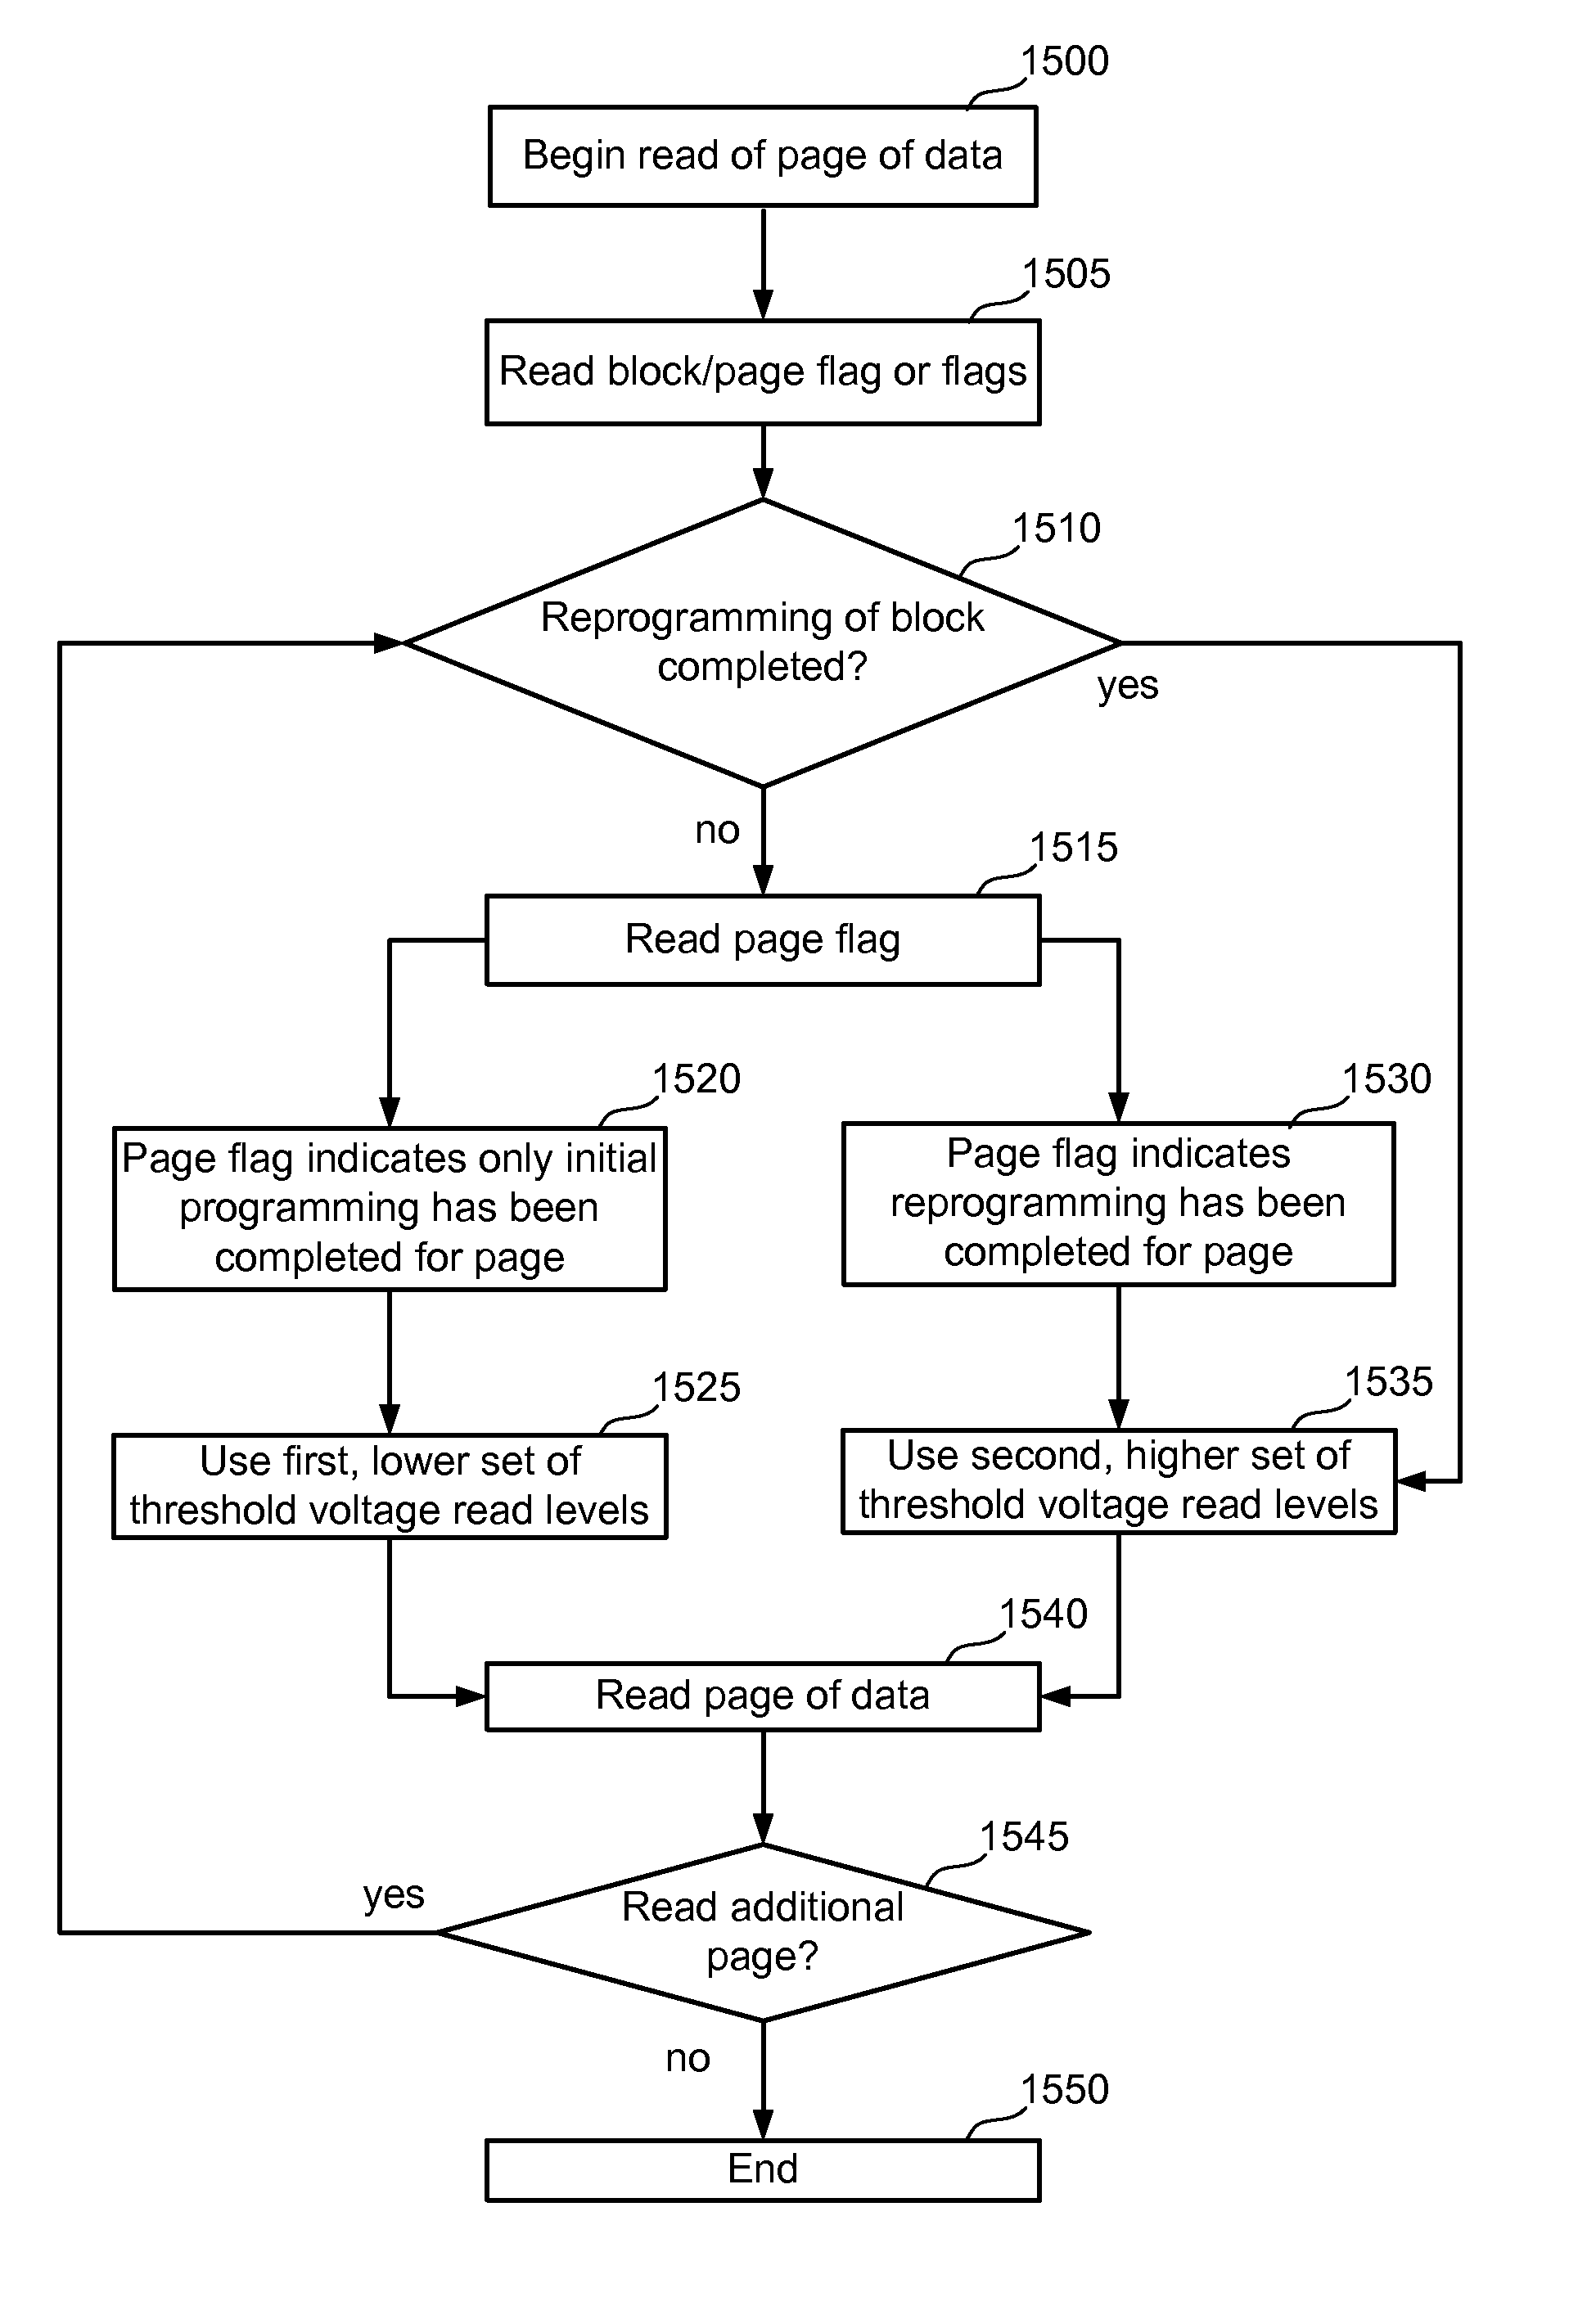 System for non-real time reprogramming of non-volatile memory to achieve tighter distribution of threshold voltages